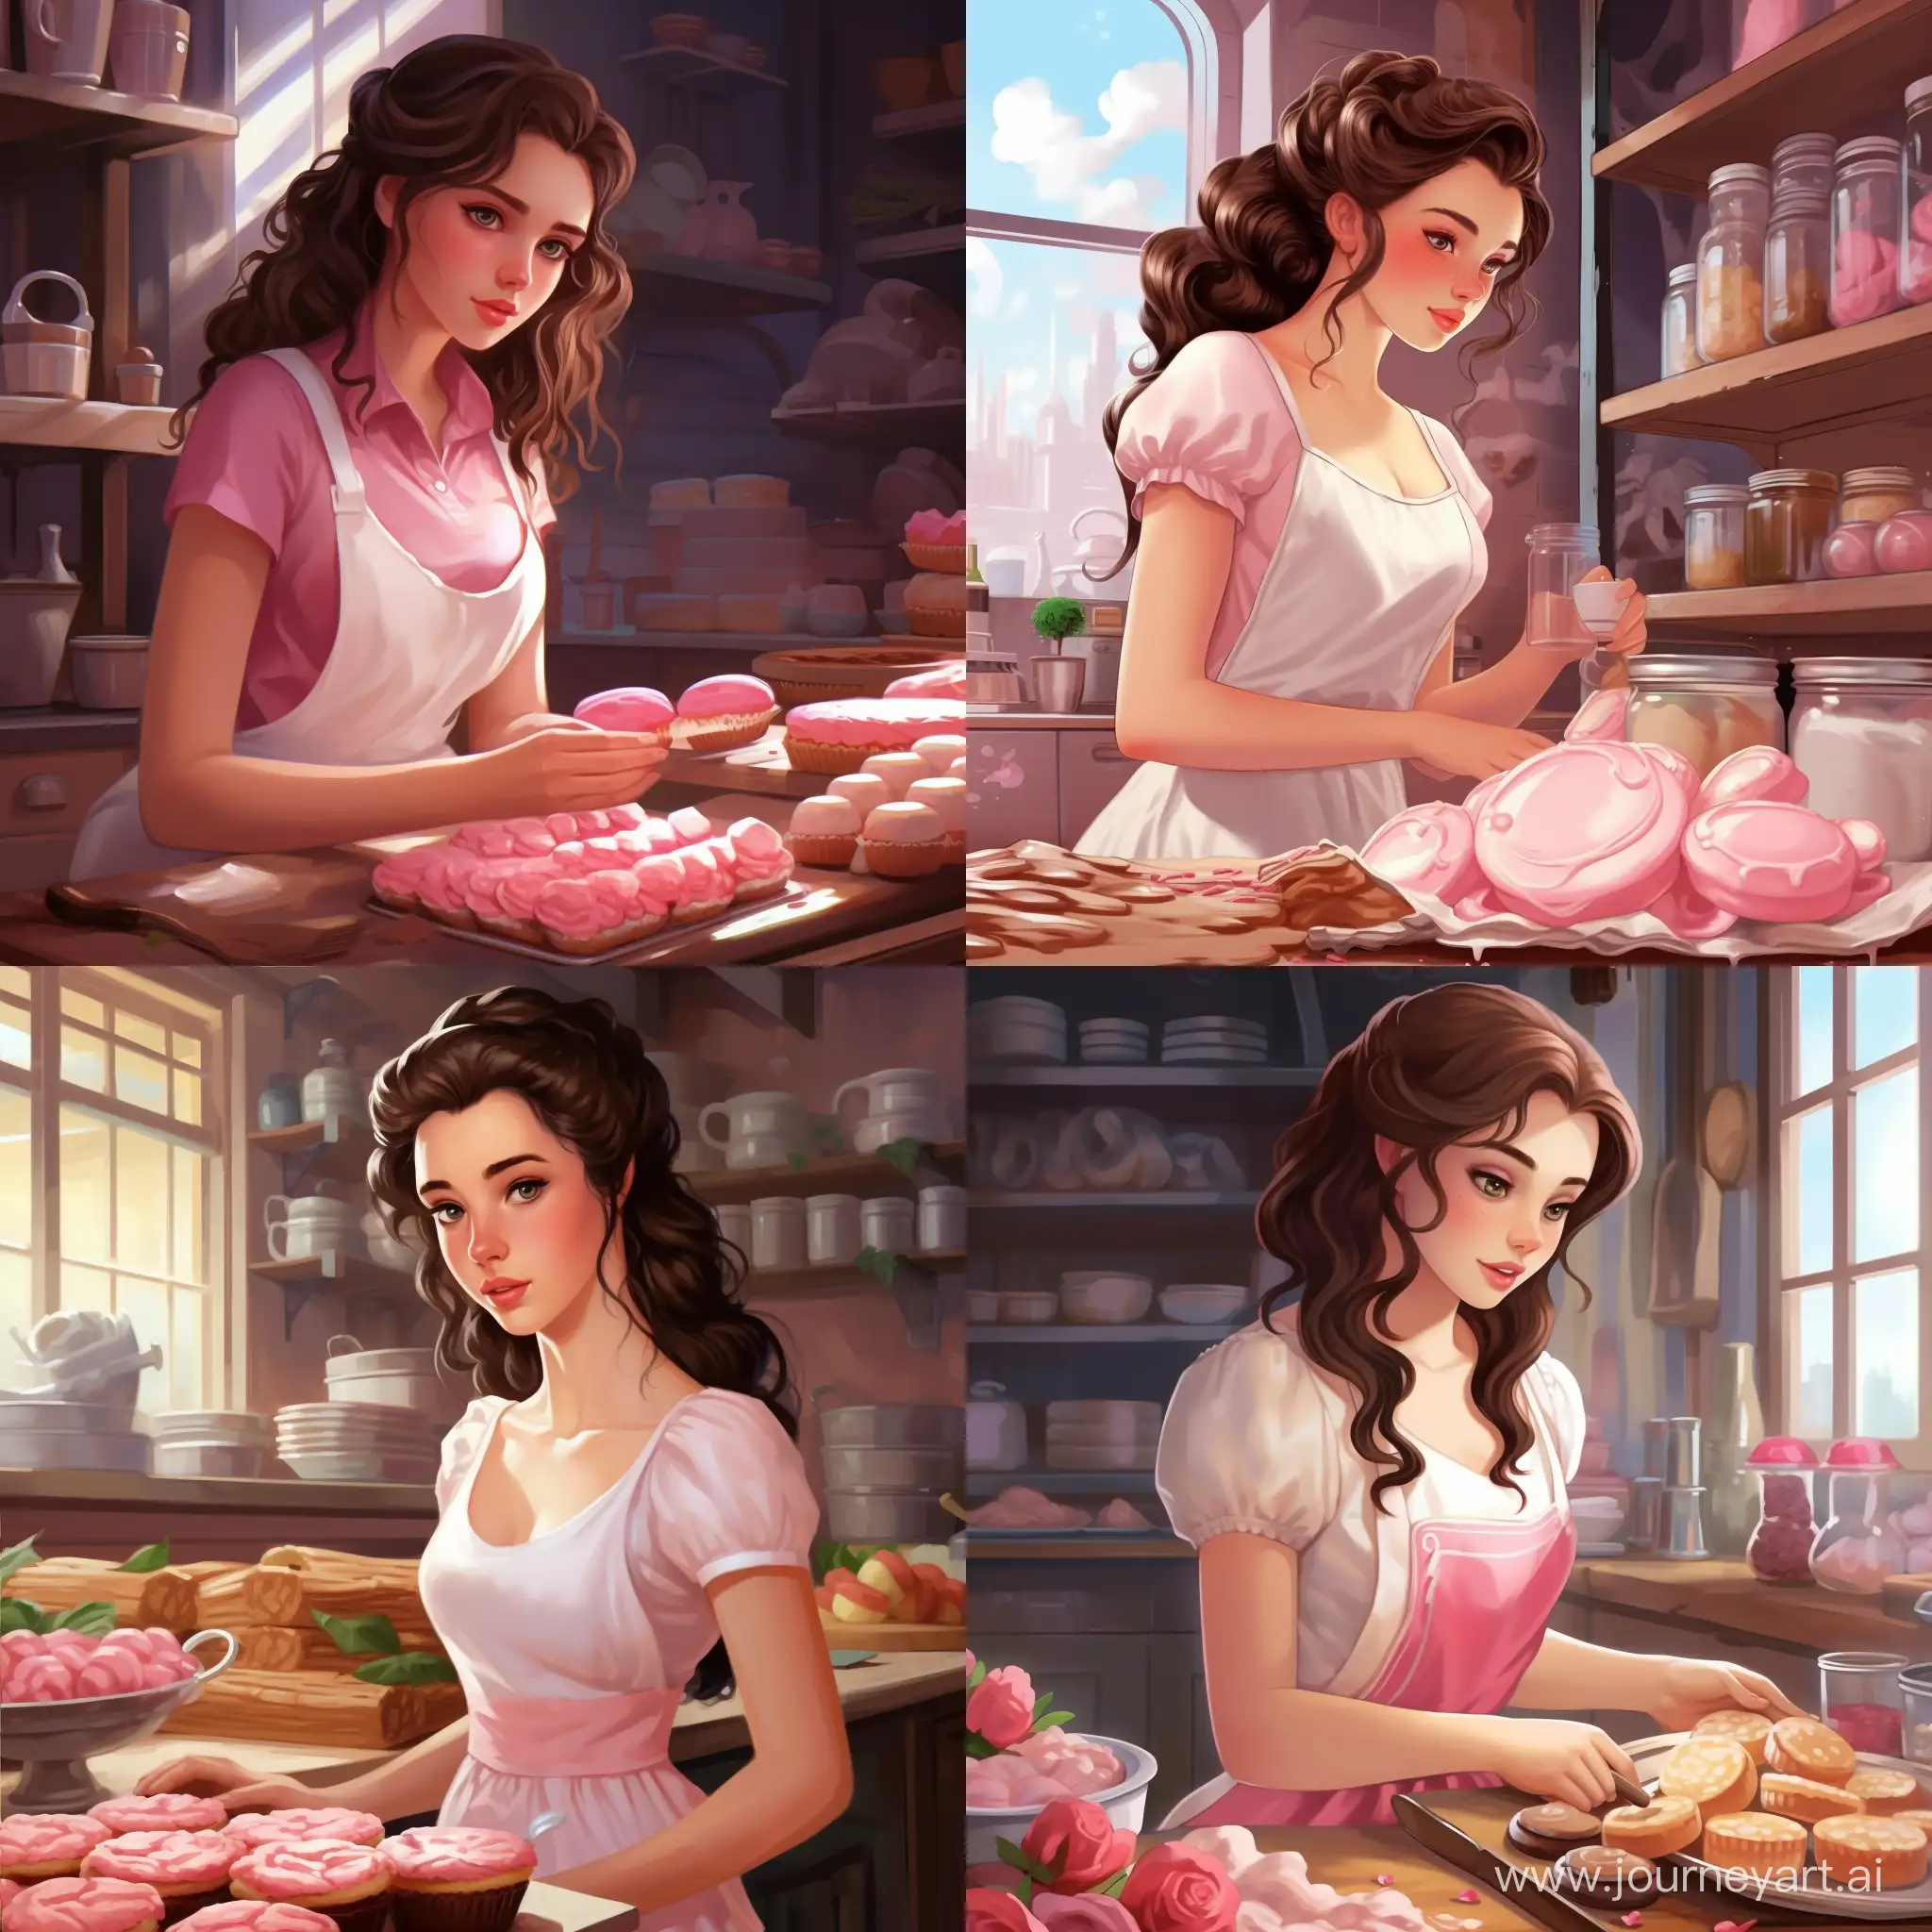 Beautiful girl, straight dark hair, expressive green eyes, snow-white skin, teenager, 16 years old, works in a bakery, pink apron, high quality, high detail, cartoon art